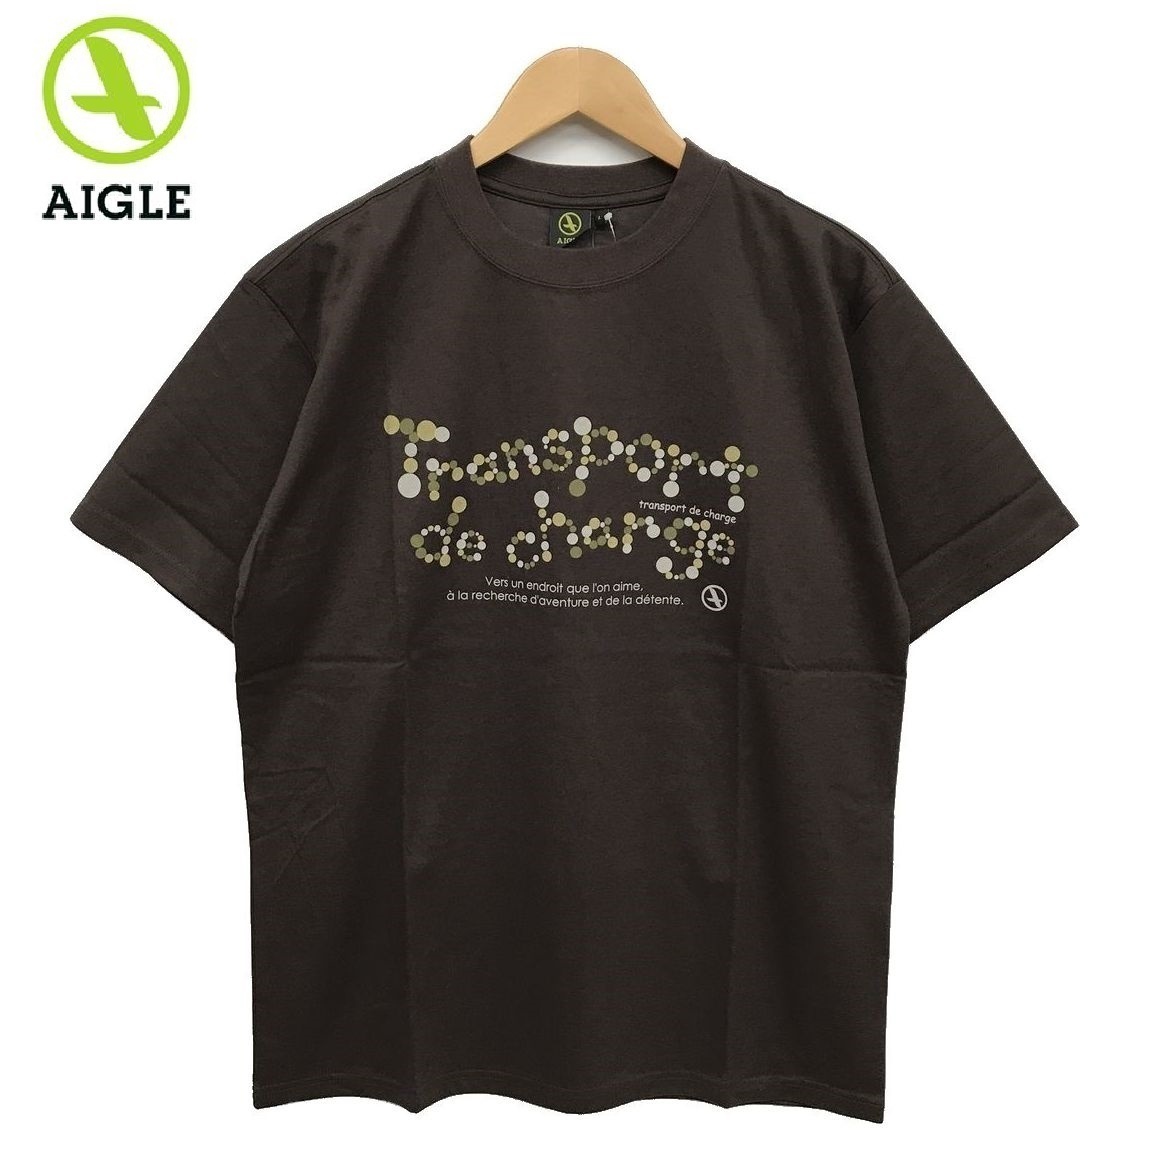  unused goods AIGLE Aigle Sophista Logo message print short sleeves T-shirt cut and sewn outdoor fes Brown tea men's XS